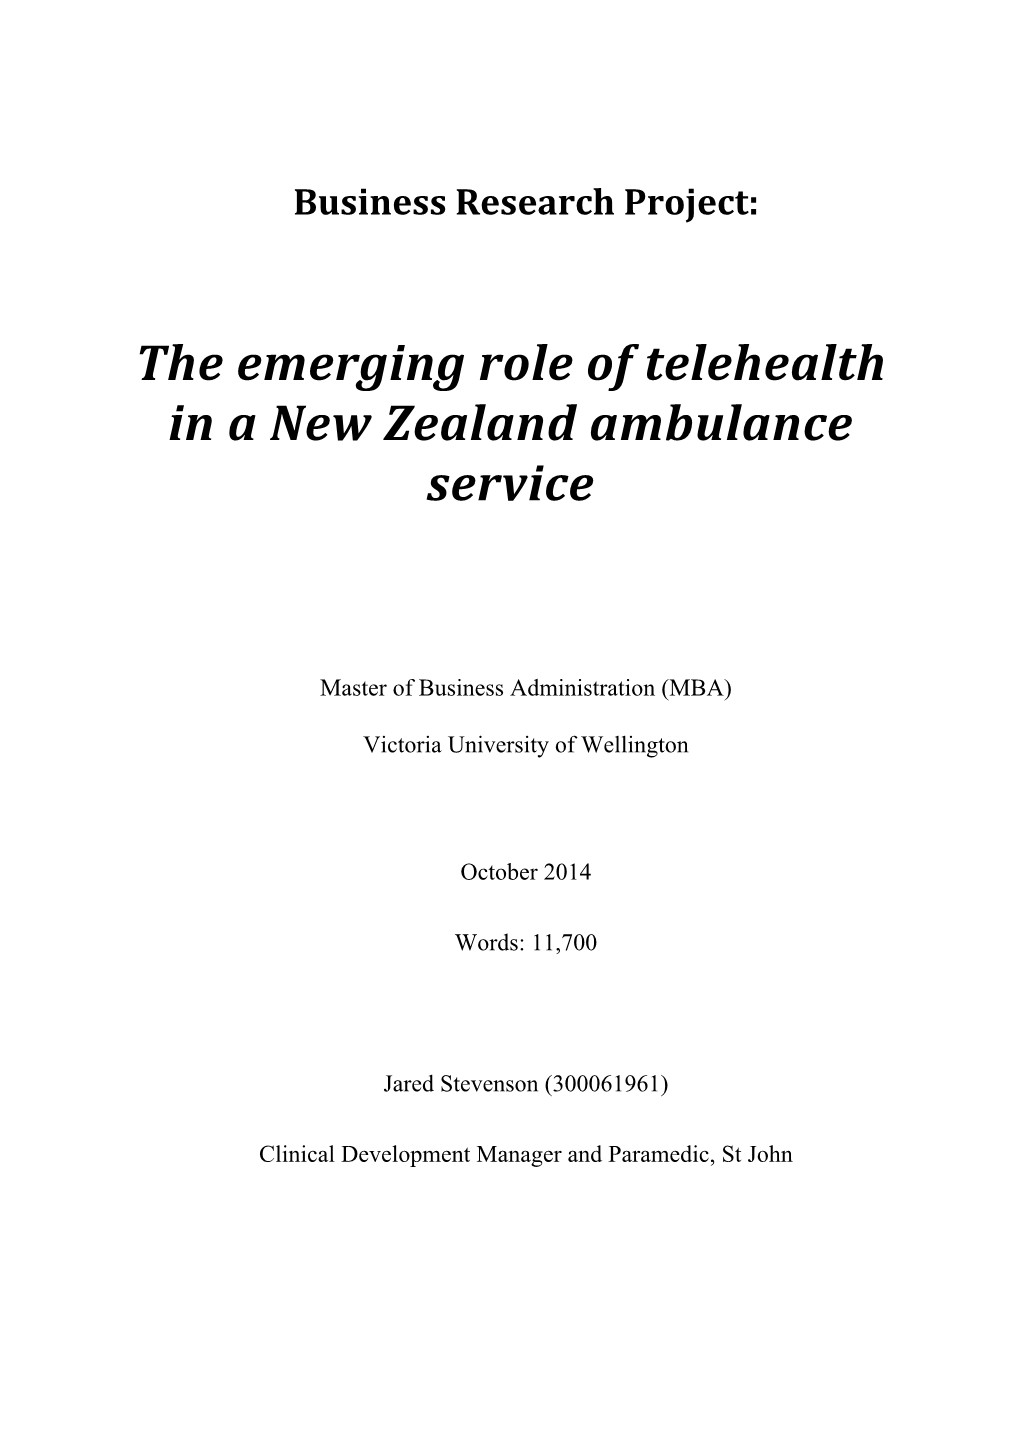 The Emerging Role of Telehealth in a New Zealand Ambulance Service